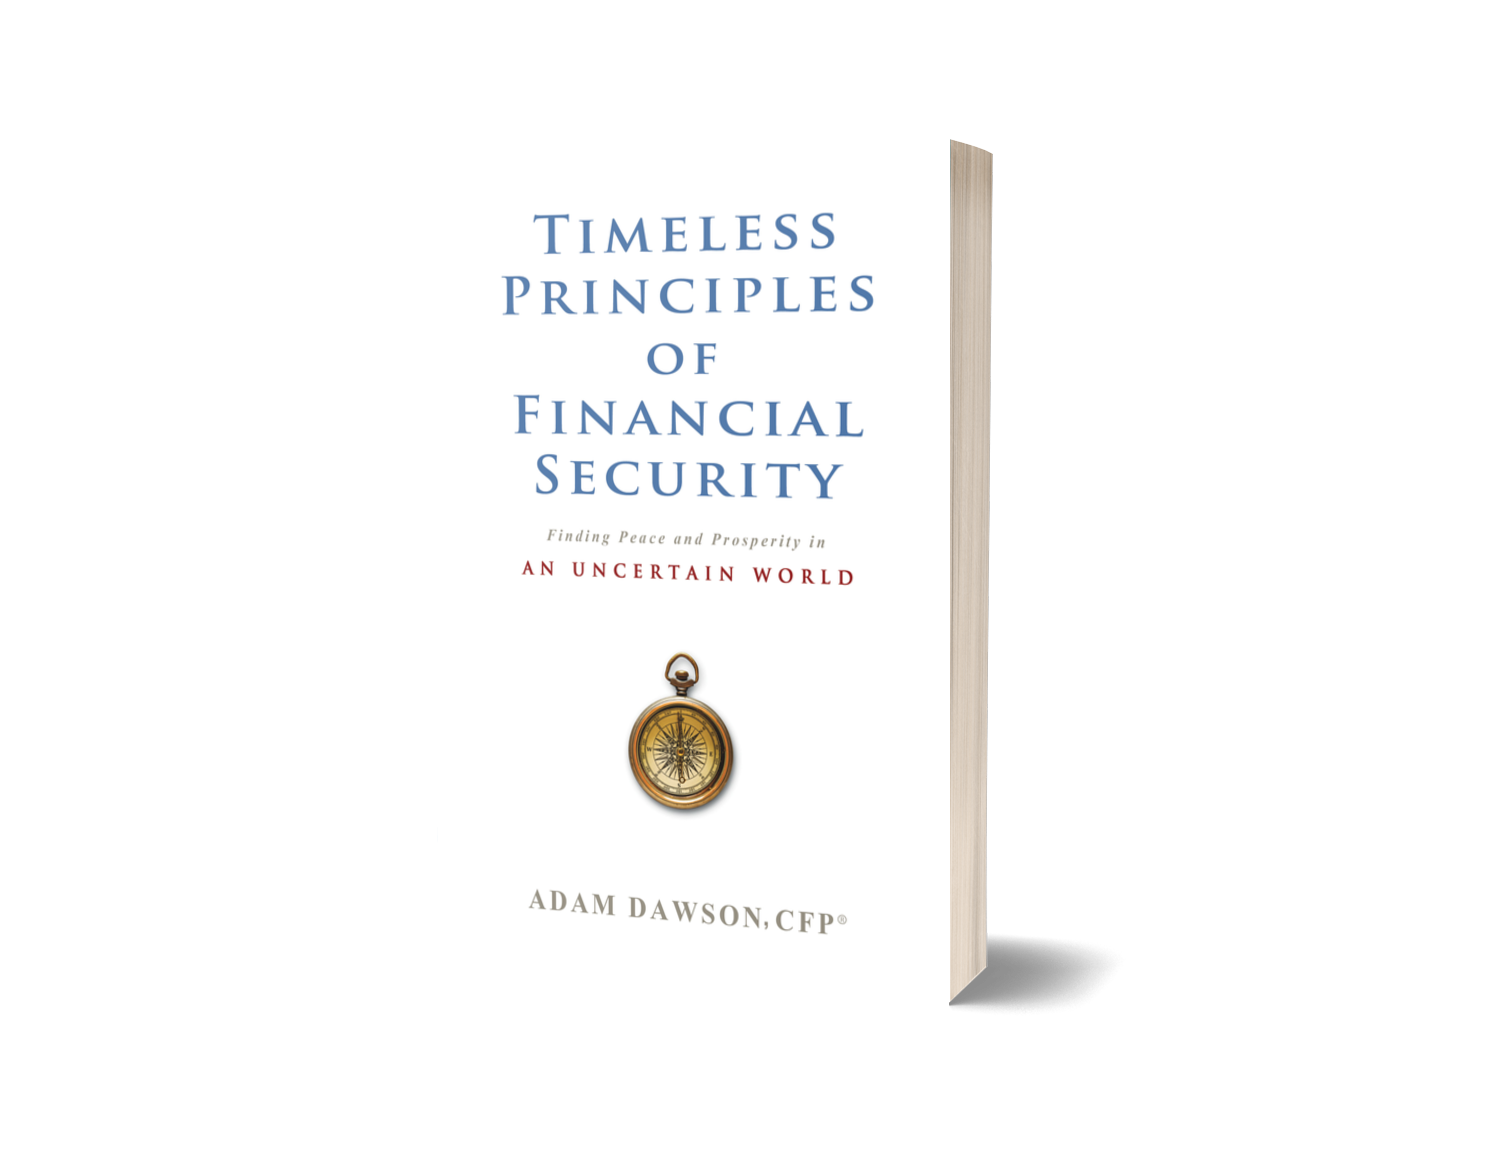 Timeless principles of financial security by Adam Dawson